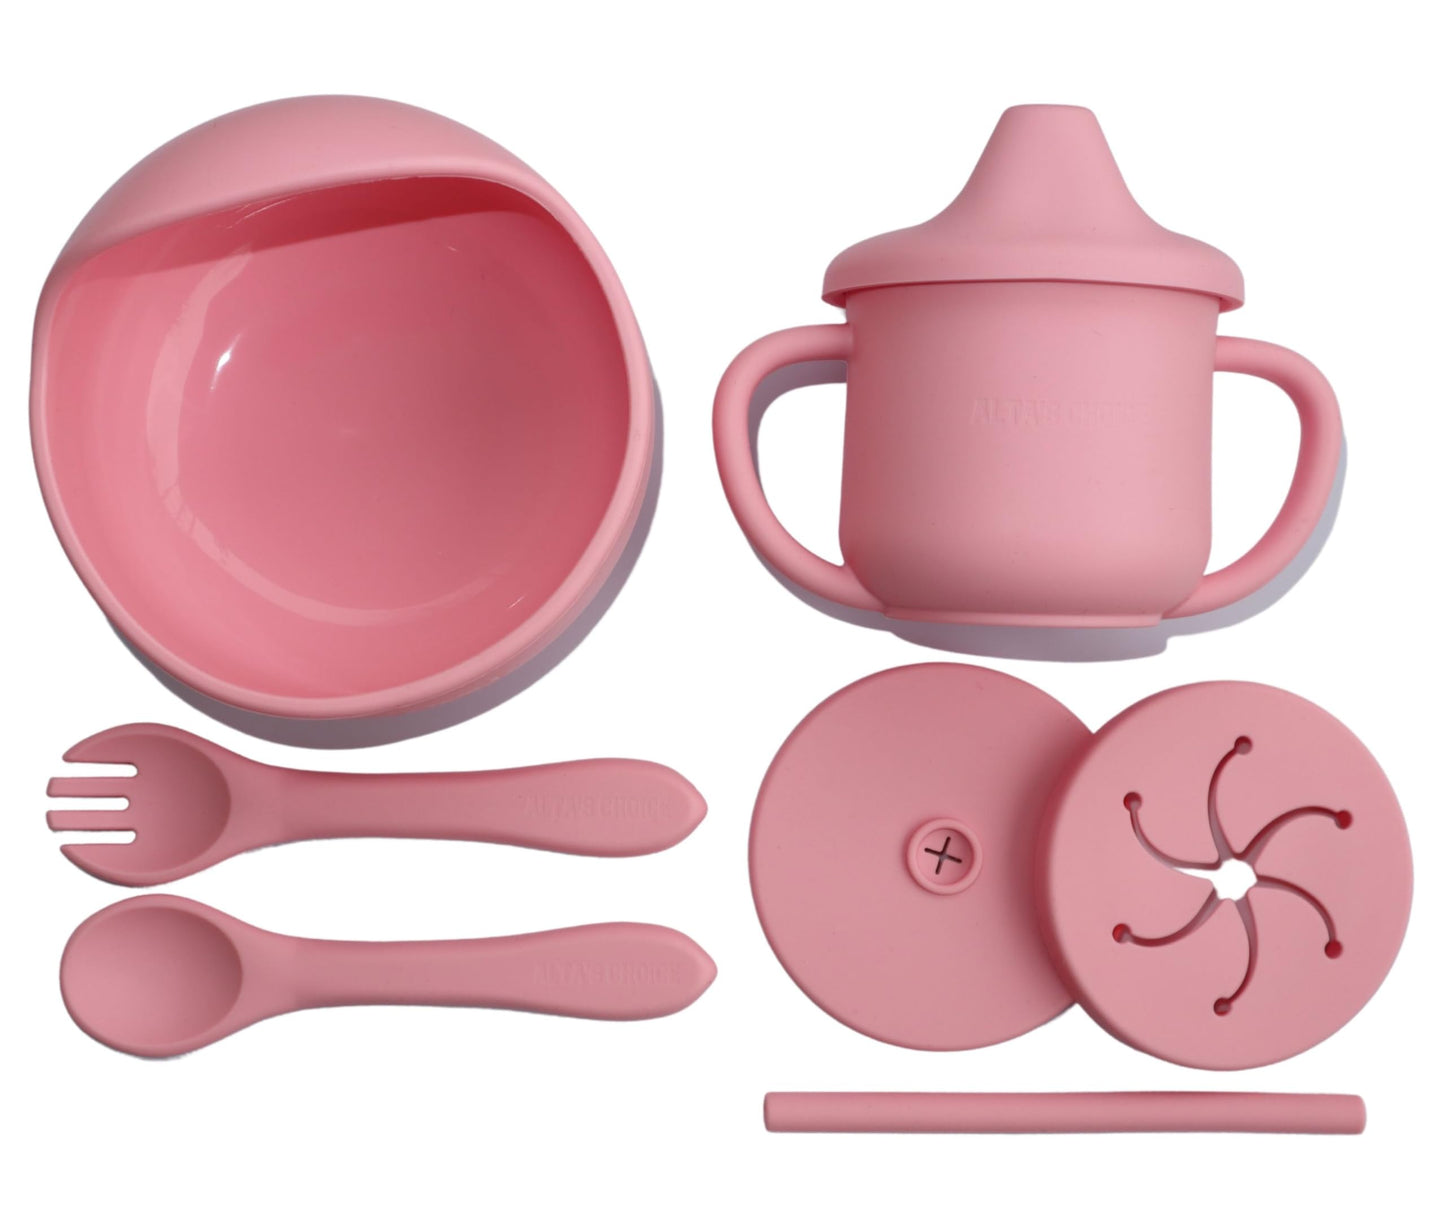 ALTA'S CHOICE Silicone Baby and Toddler Feeding Set. BPA free baby led weaning feeding supplies. Suction bowl, spoon and fork, sippy cup, snack and straw lid. For kids 6+ months. (BABY PINK)